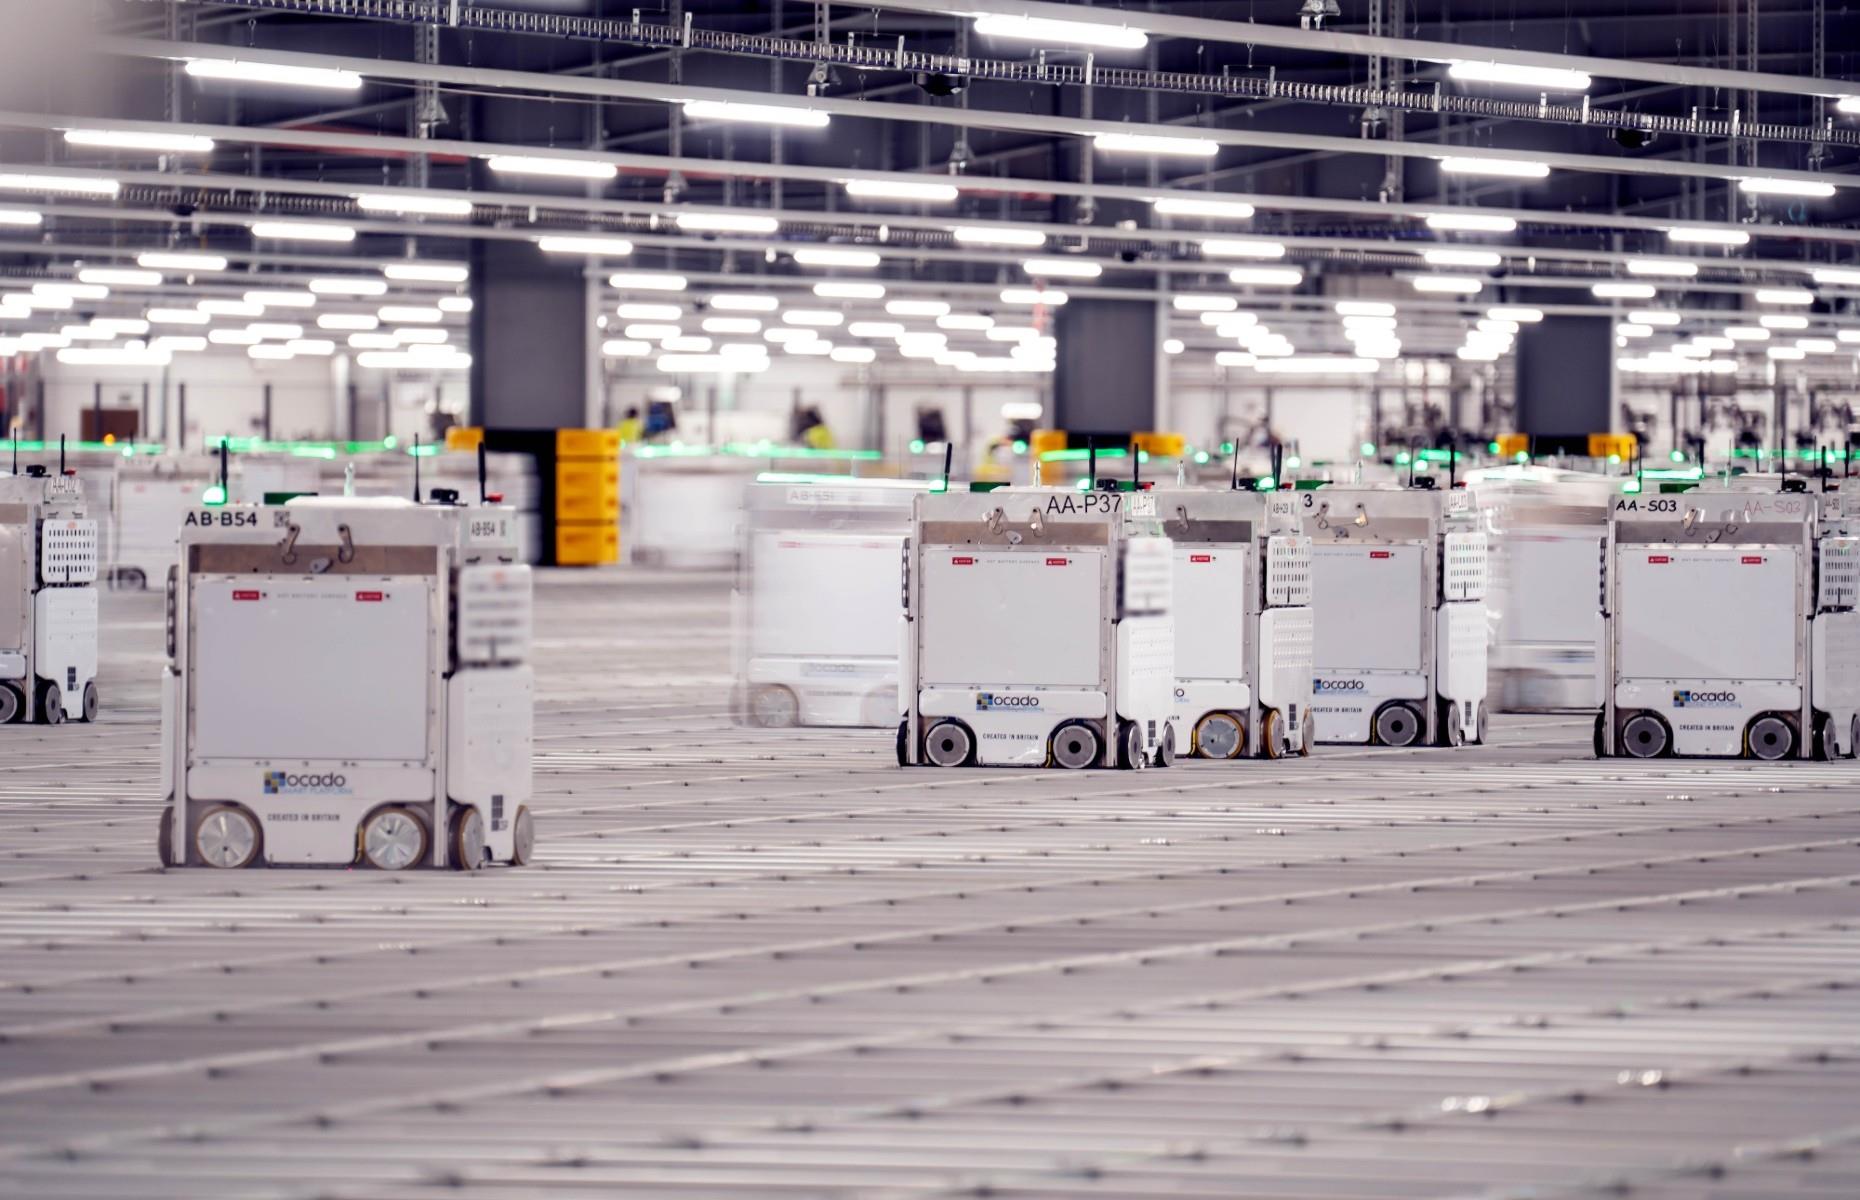 Robots packing your groceries